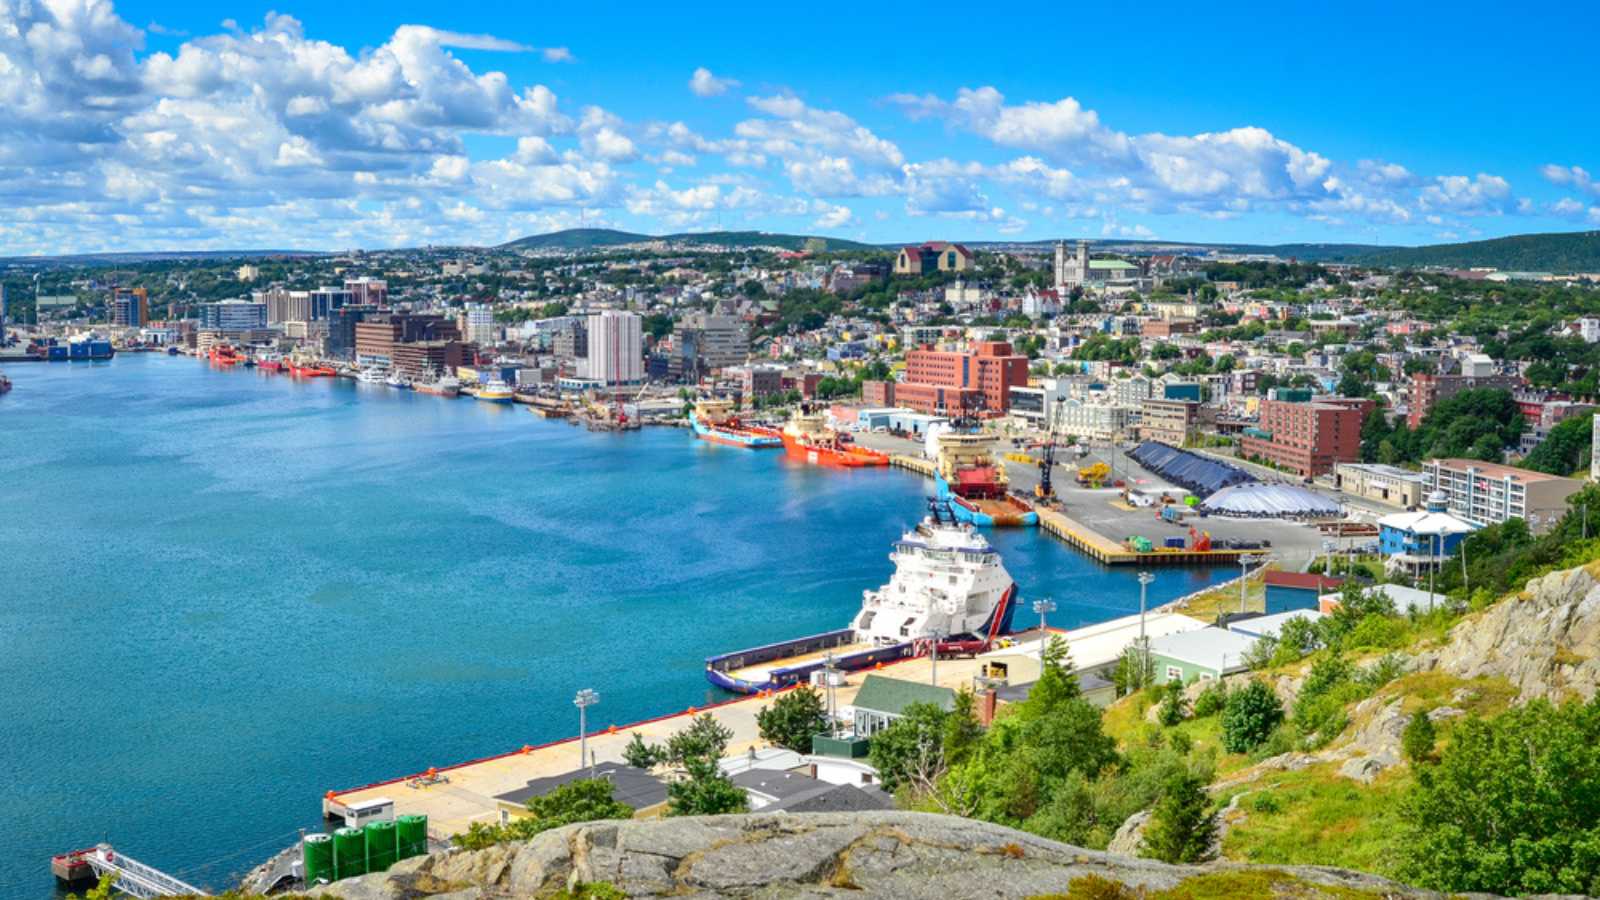 <p>A college student indicated how beautiful St. John's is—elaborating on everything from nature, the architecture and activities. They continued by stating that St. John's was not too big of a city where you couldn't learn your way around after a few trips.</p>